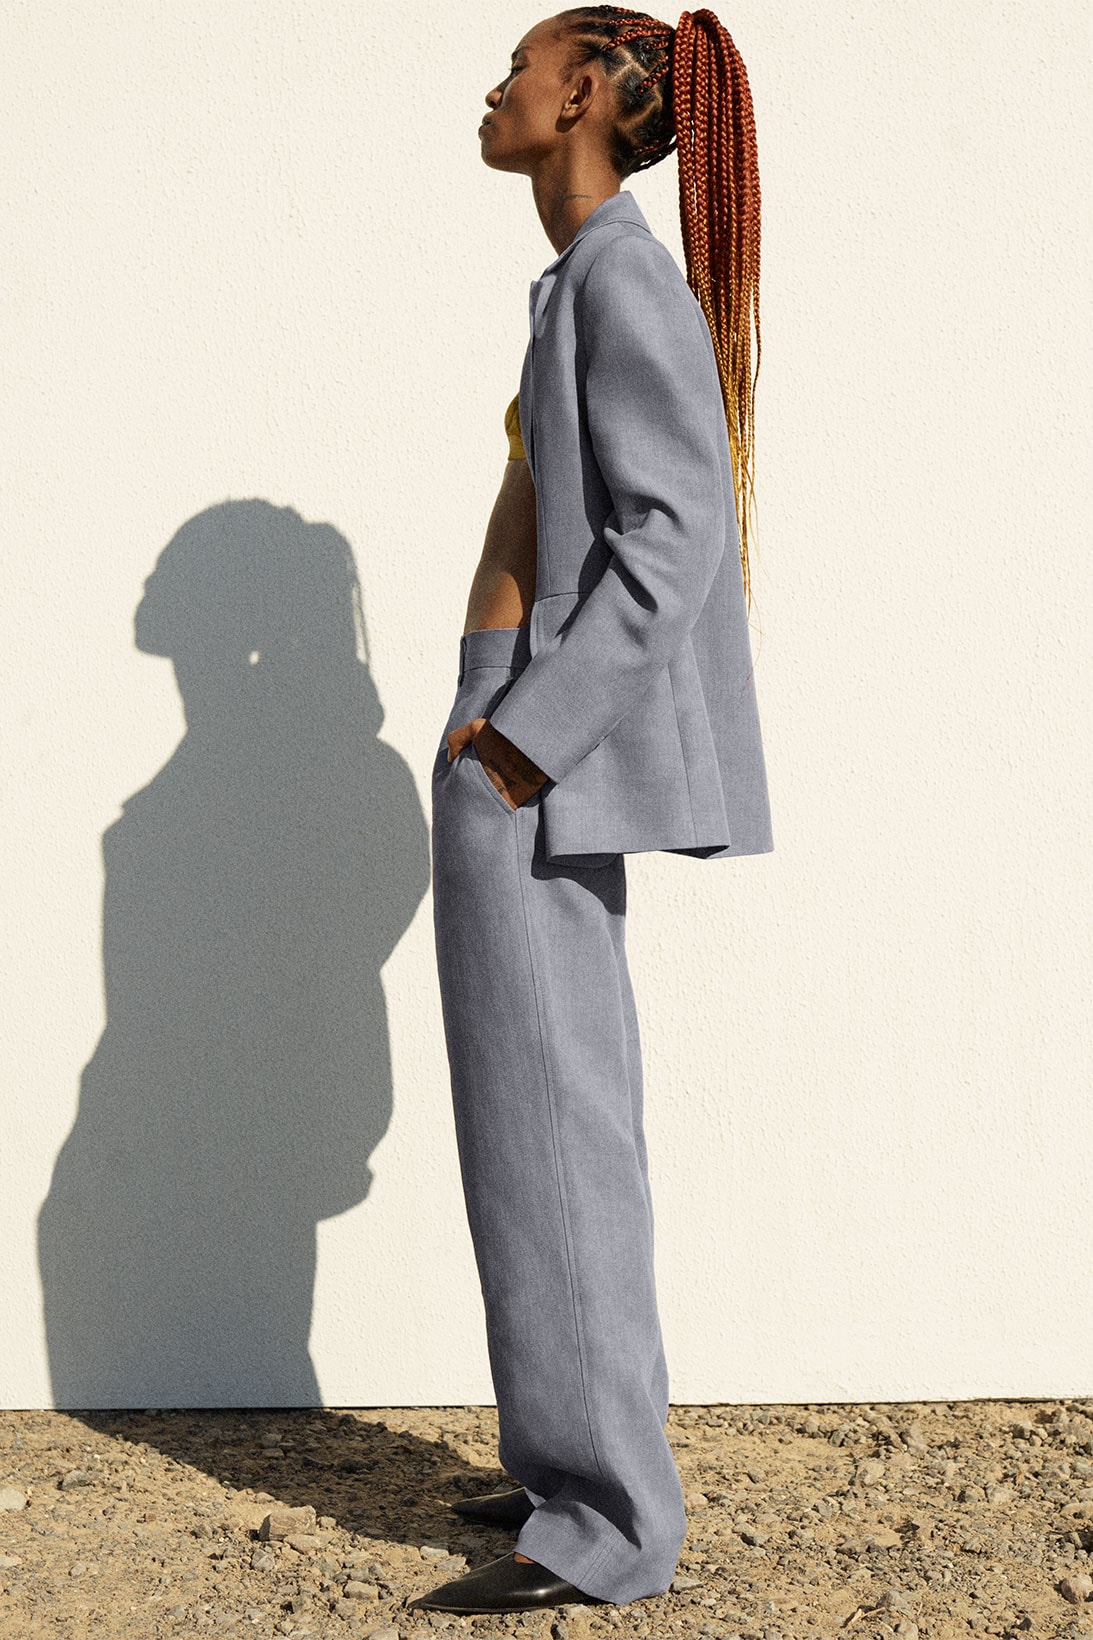 cos spring summer ss21 collection campaign Adesuwa Aighewi grey suit jacket pants